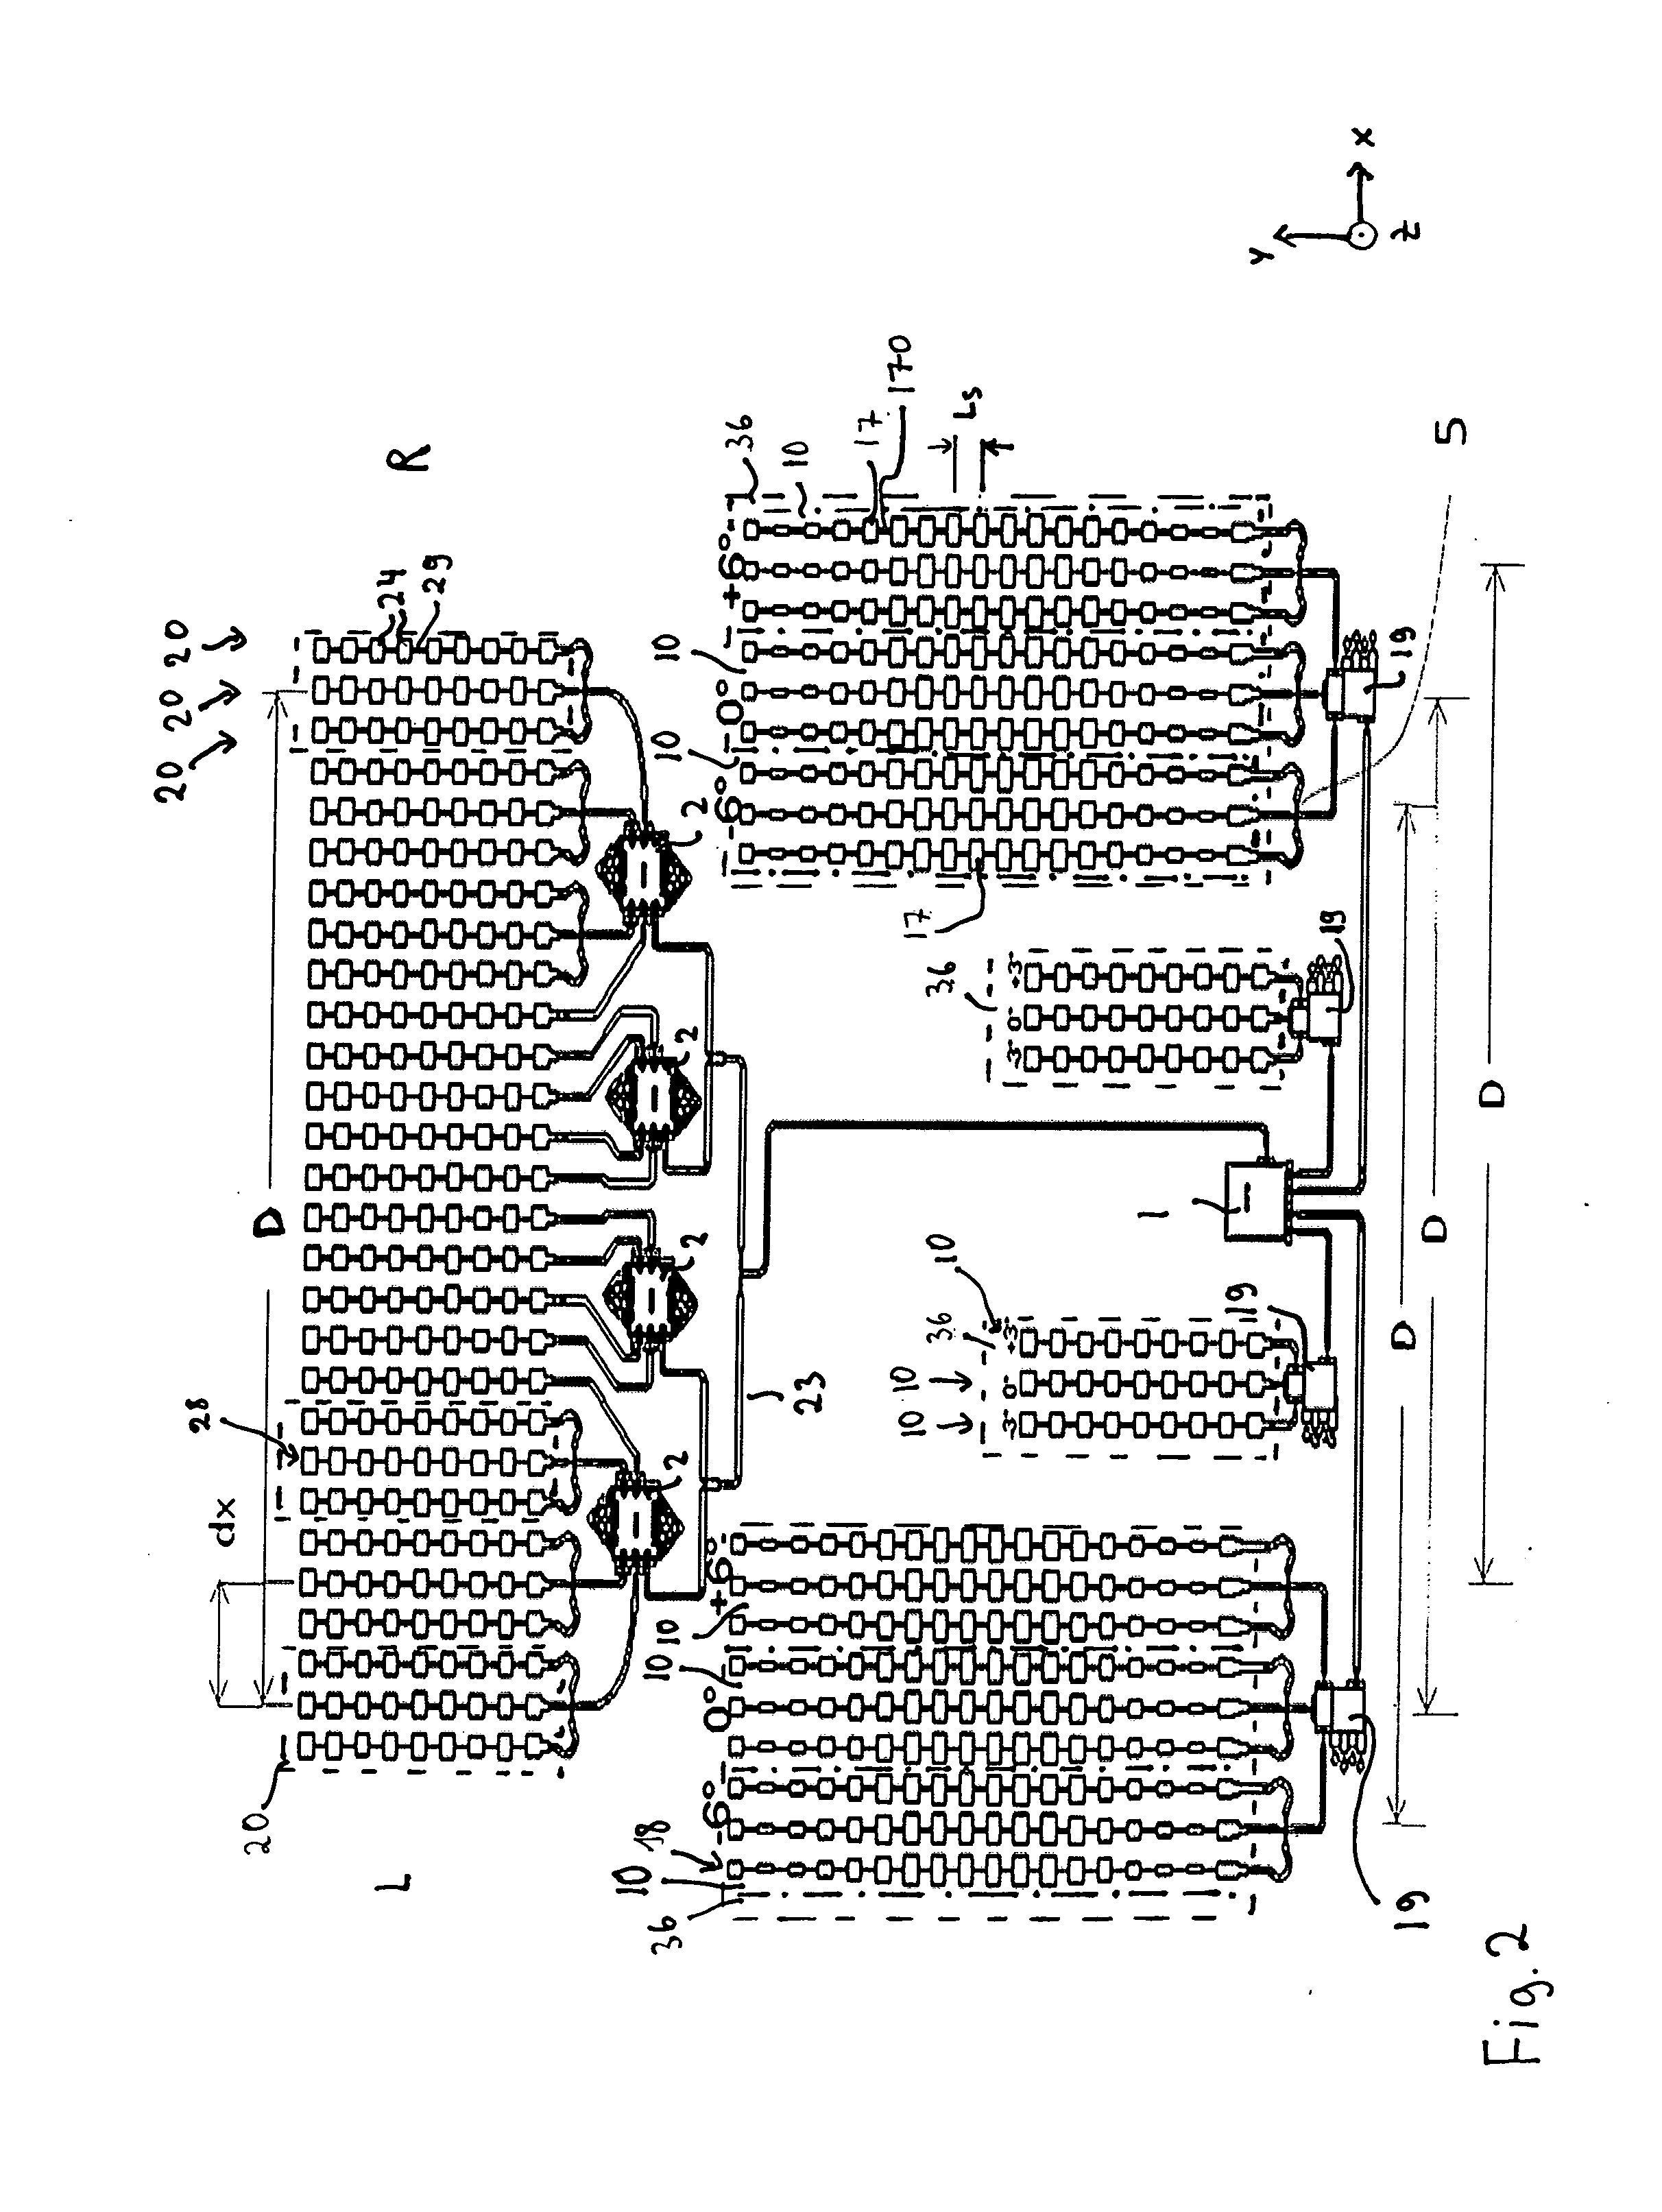 Imaging radar sensor with synthetic enlargement of the antenna aperture and two-dimensional beam sweep